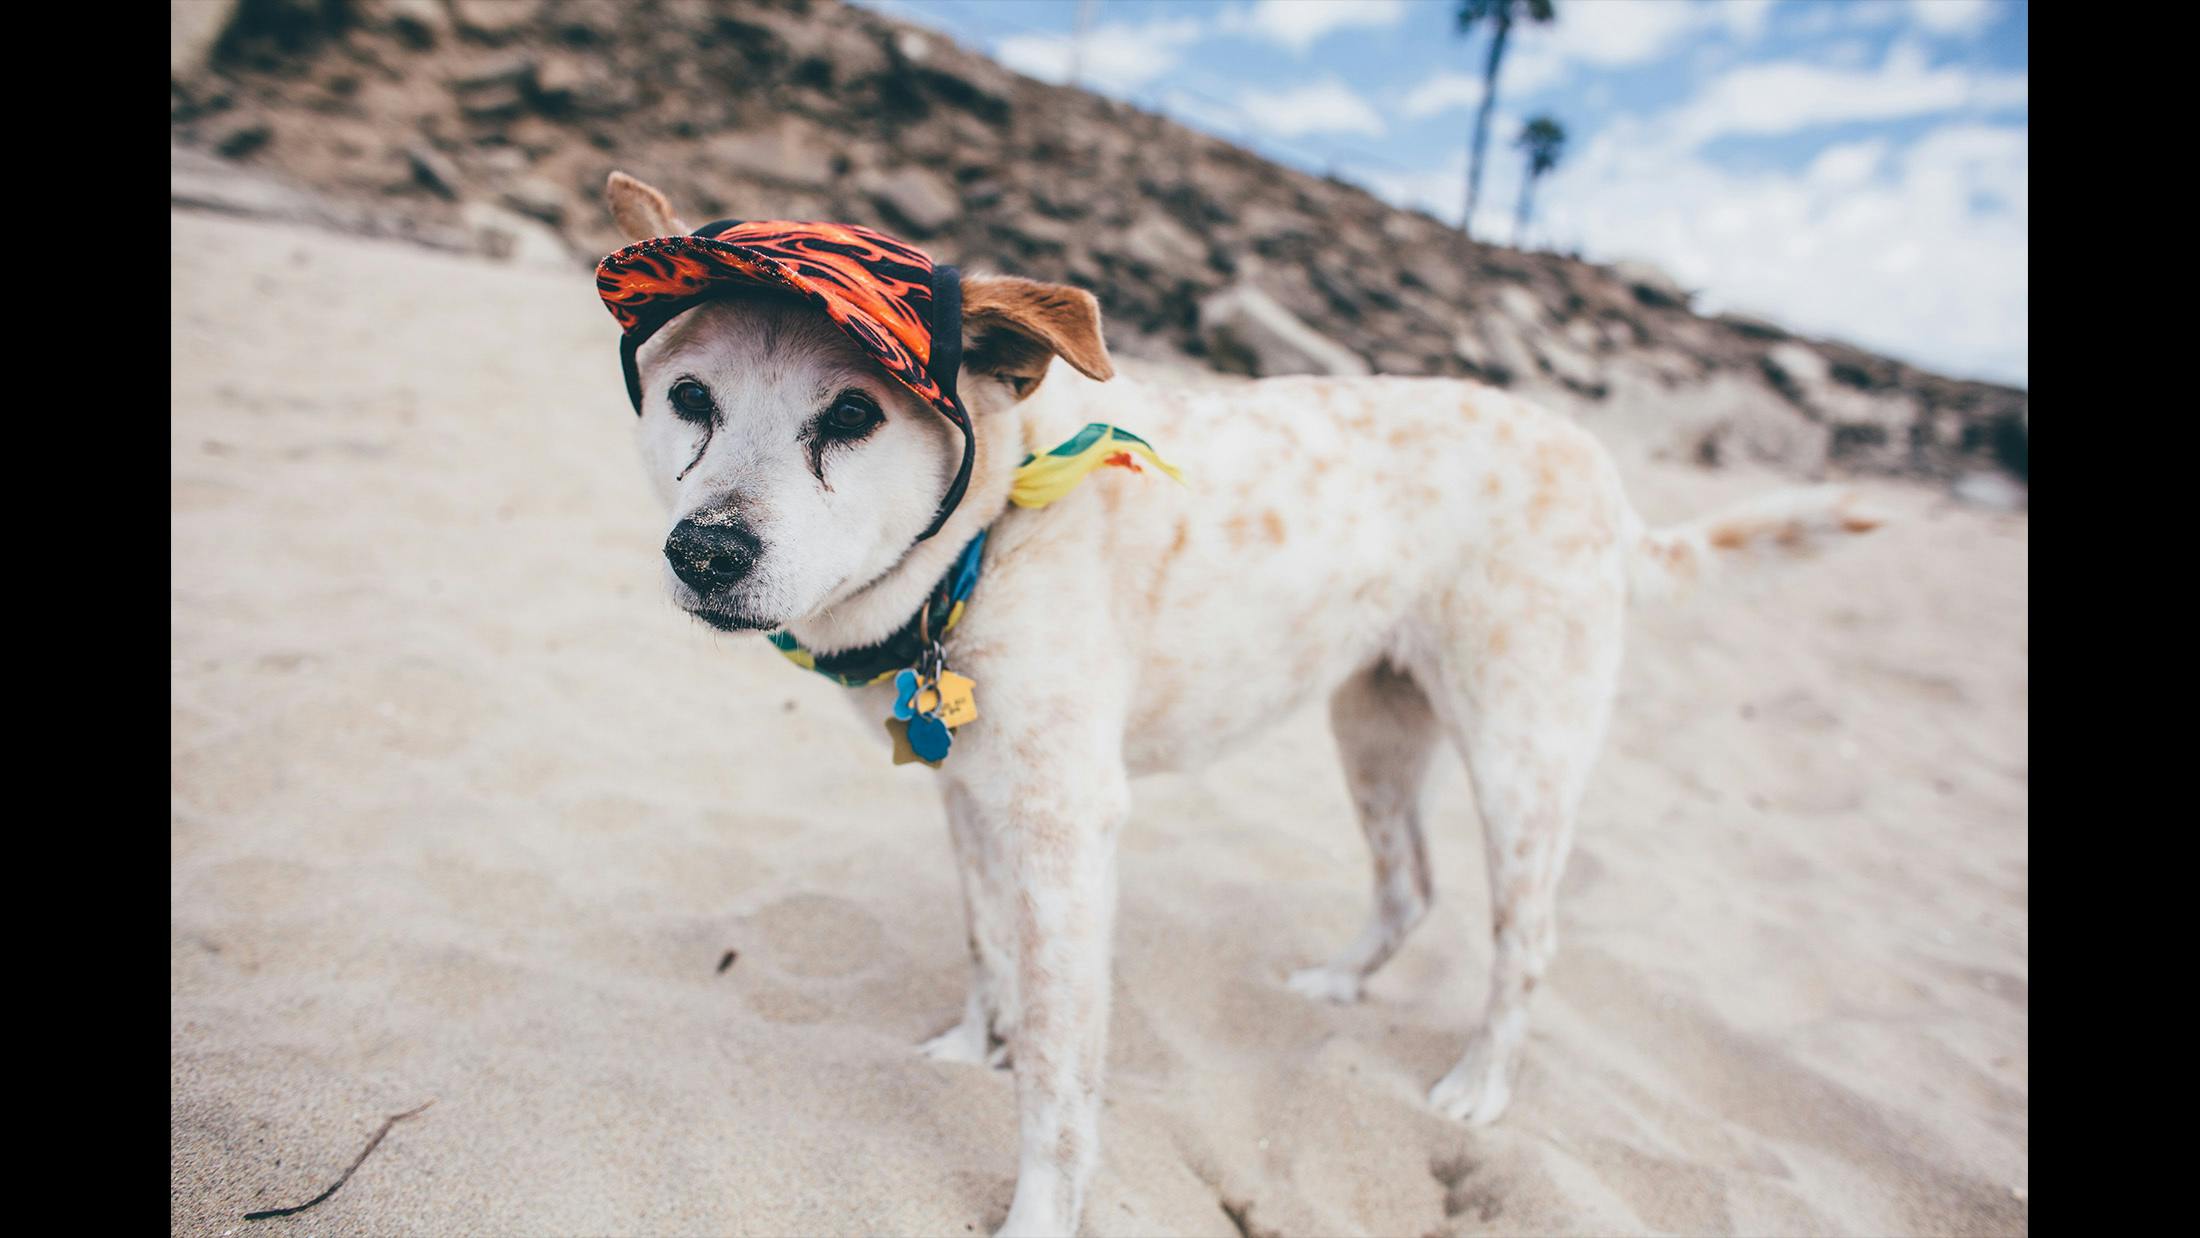 Jazz the dog with the fire hat, who we met at Huntington Dog Beach. He out-styled everyone.